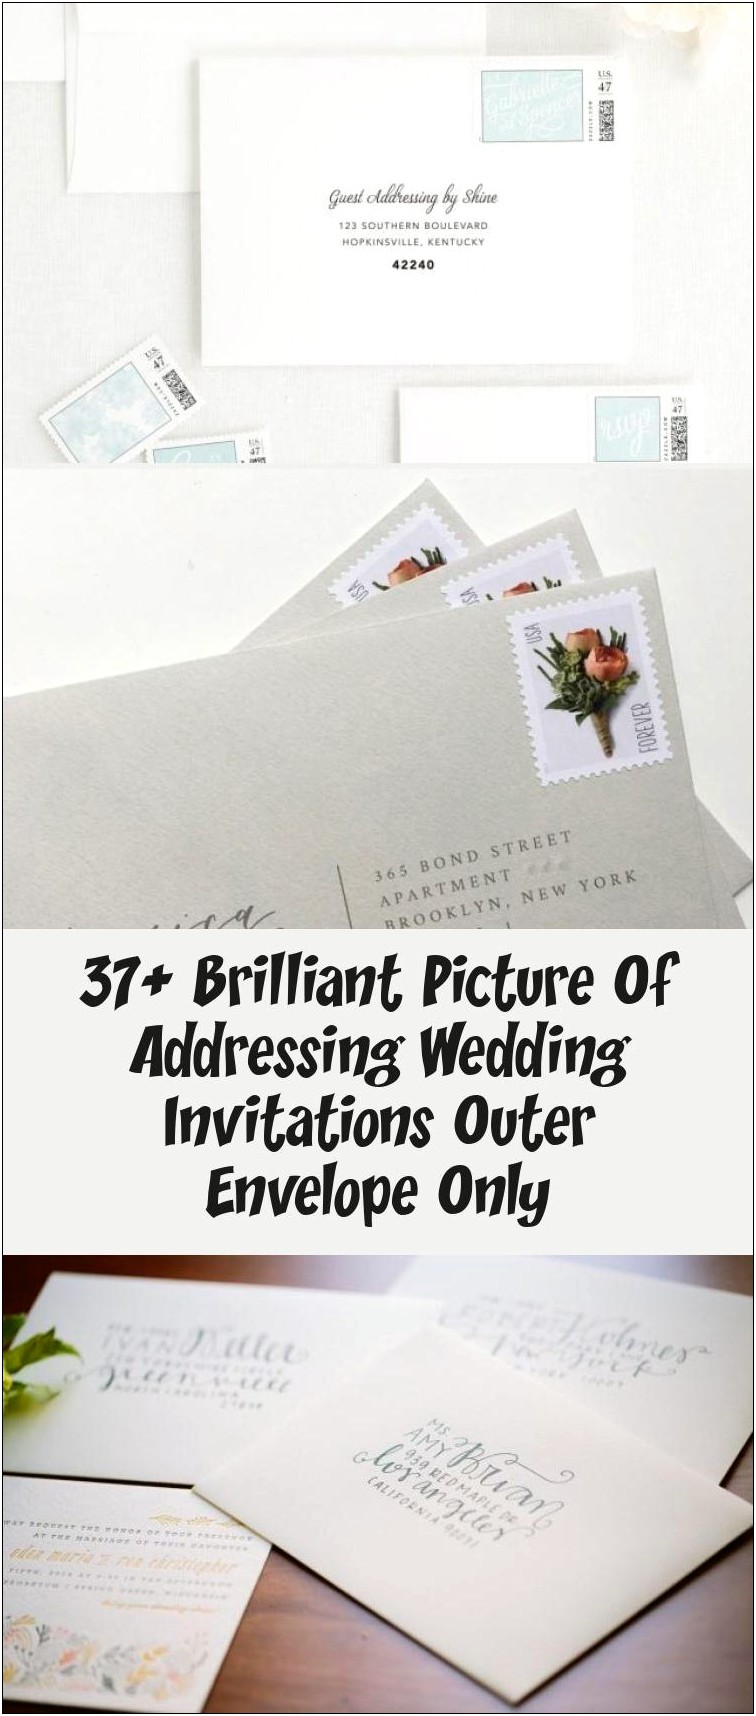 Addressing Wedding Invitations With Only An Outer Envelope